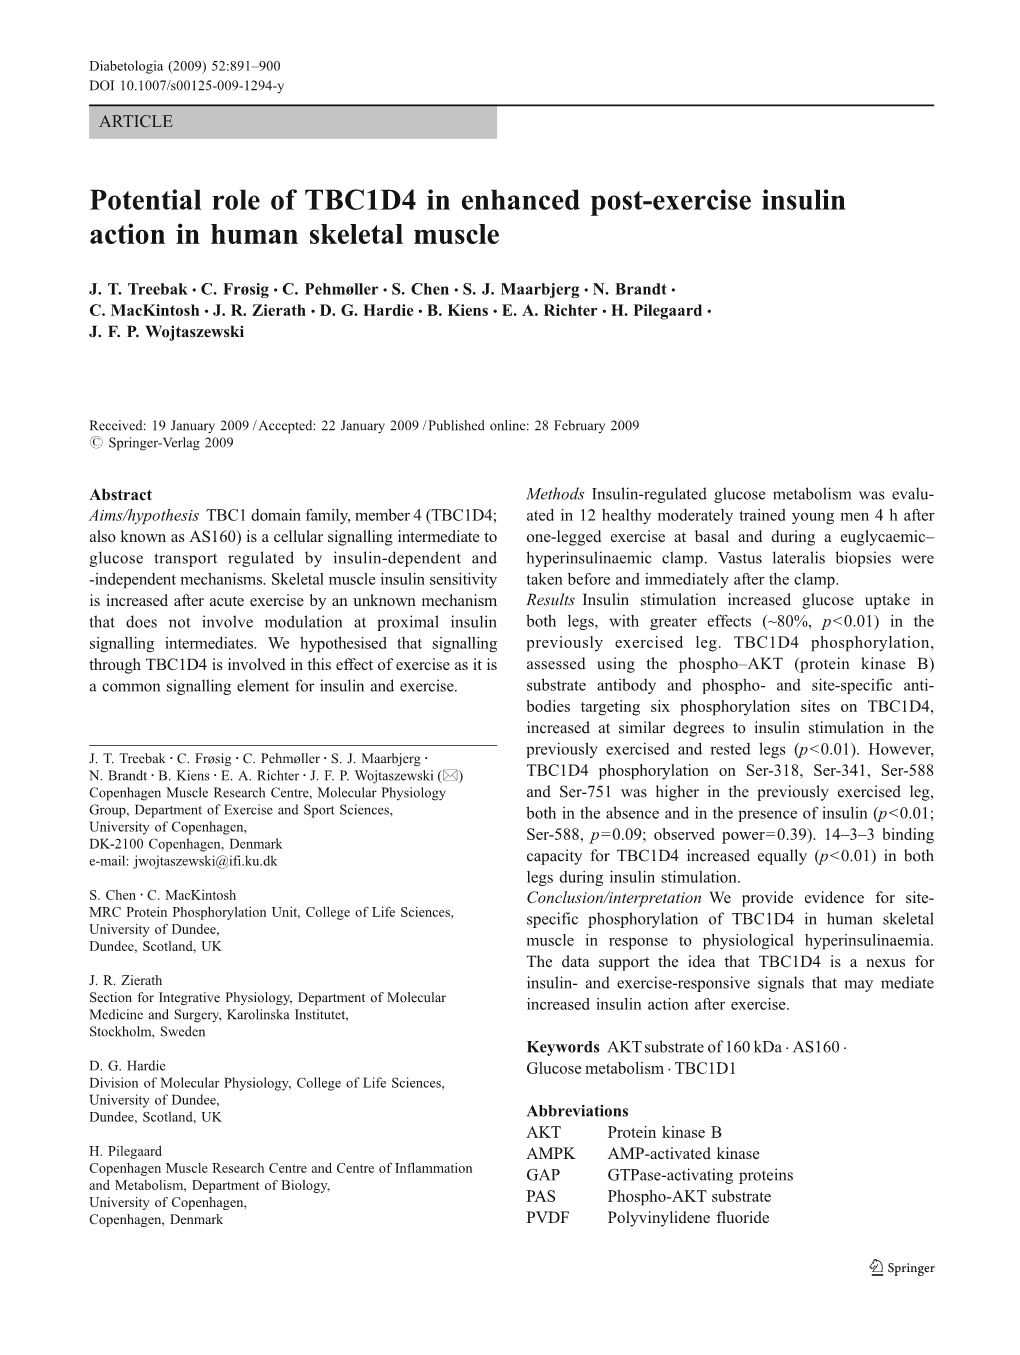 Potential Role of TBC1D4 in Enhanced Post-Exercise Insulin Action in Human Skeletal Muscle